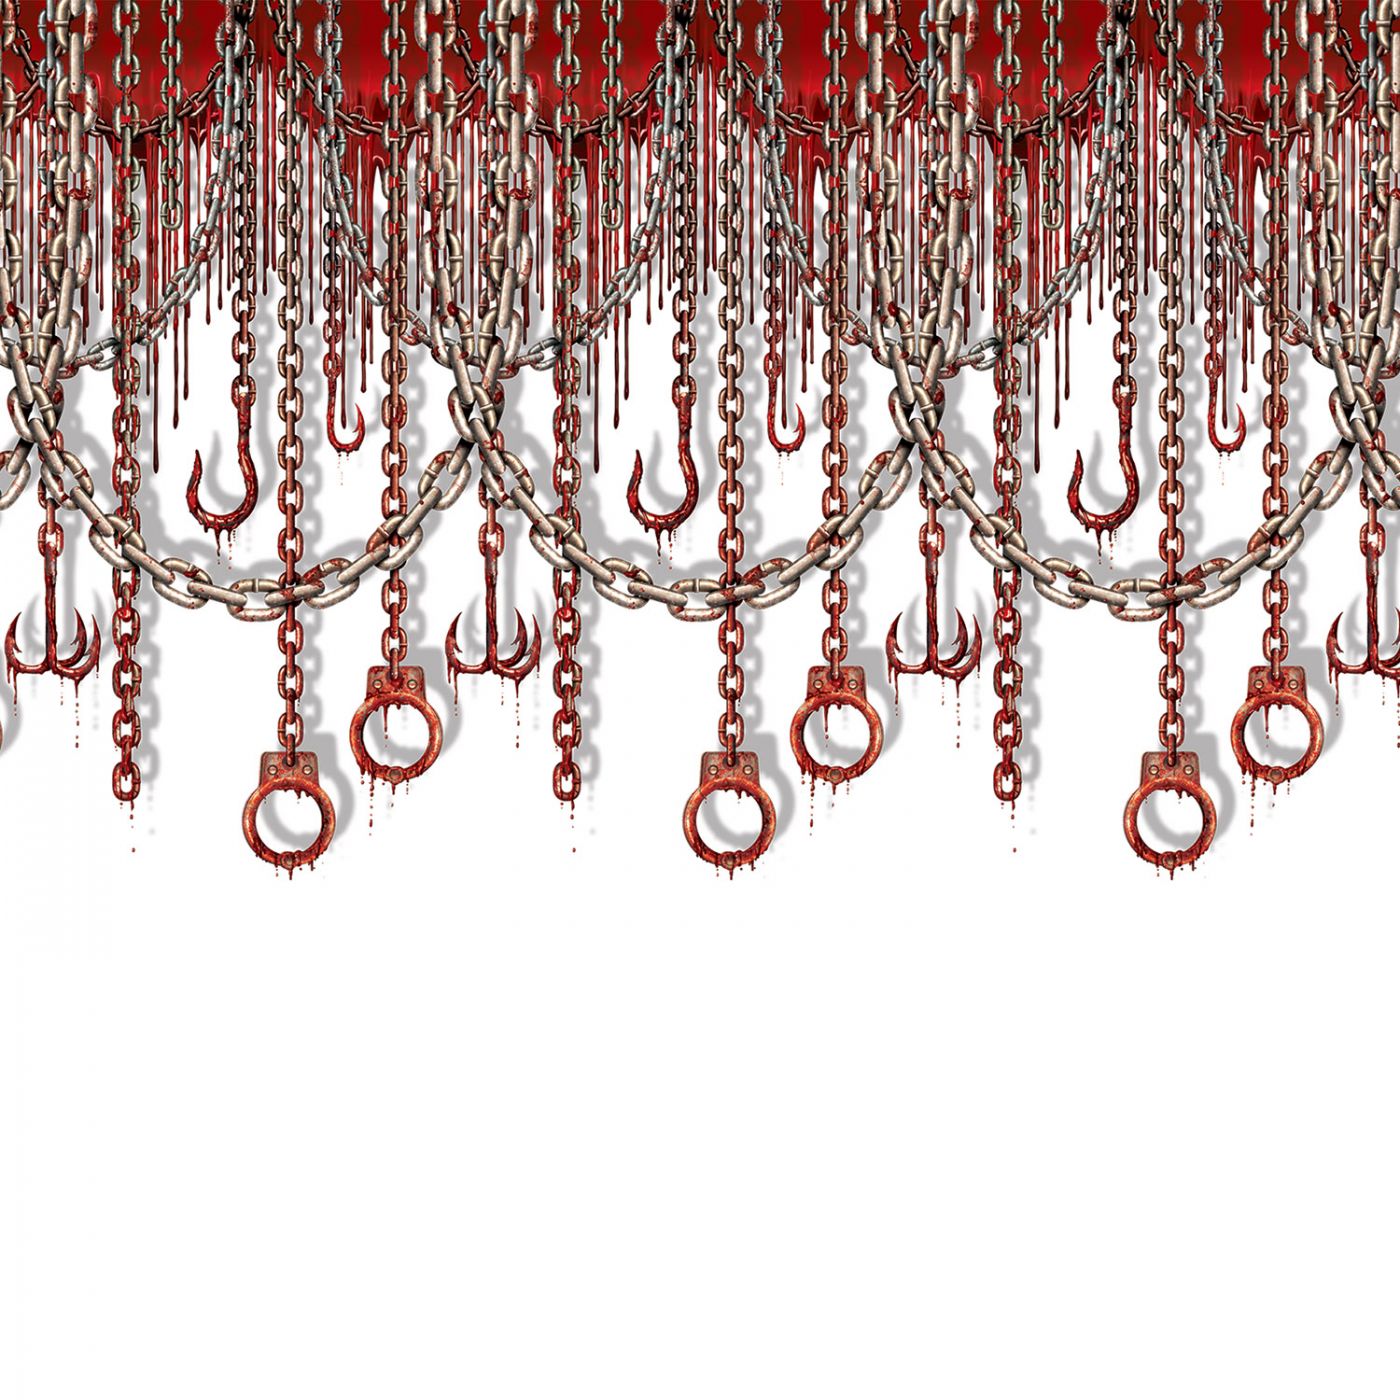 Image of Bloody Chains & Hooks Backdrop (6)